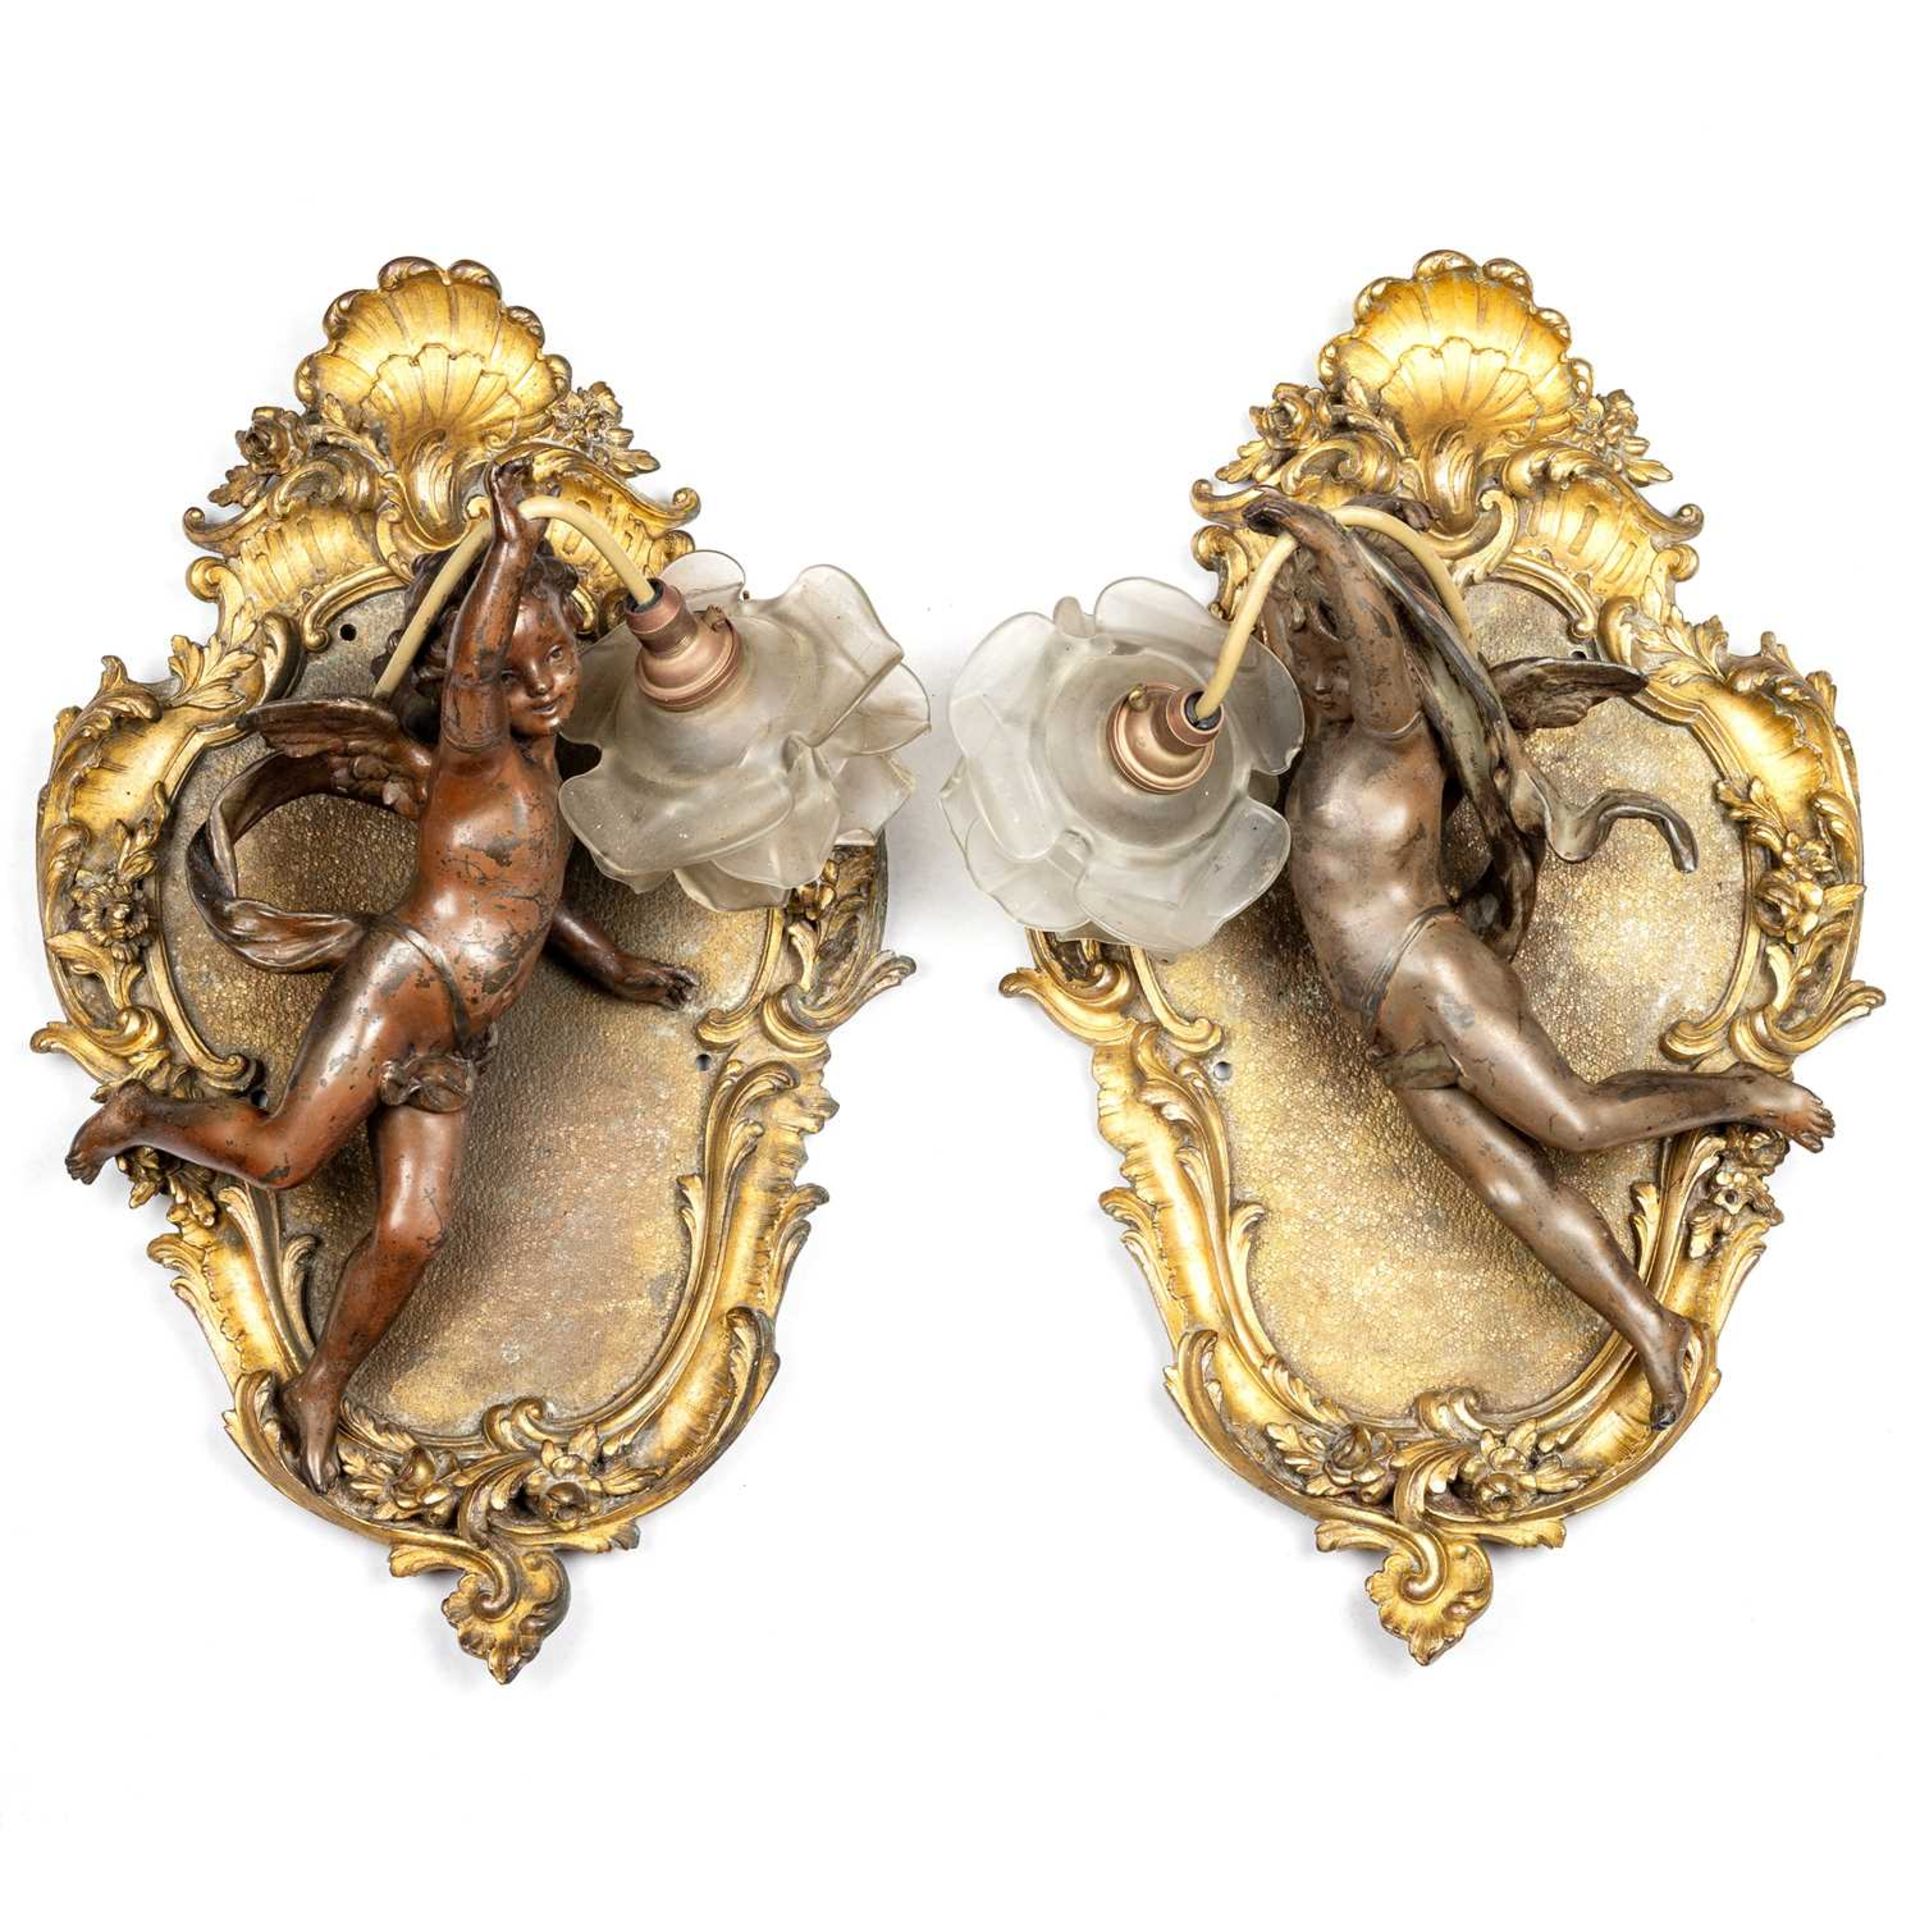 A PAIR OF 19TH CENTURY GILT-BRONZE PUTTI WALL LIGHTS, IN THE MANNER OF FRANCOIS LINKE (1855-1946)